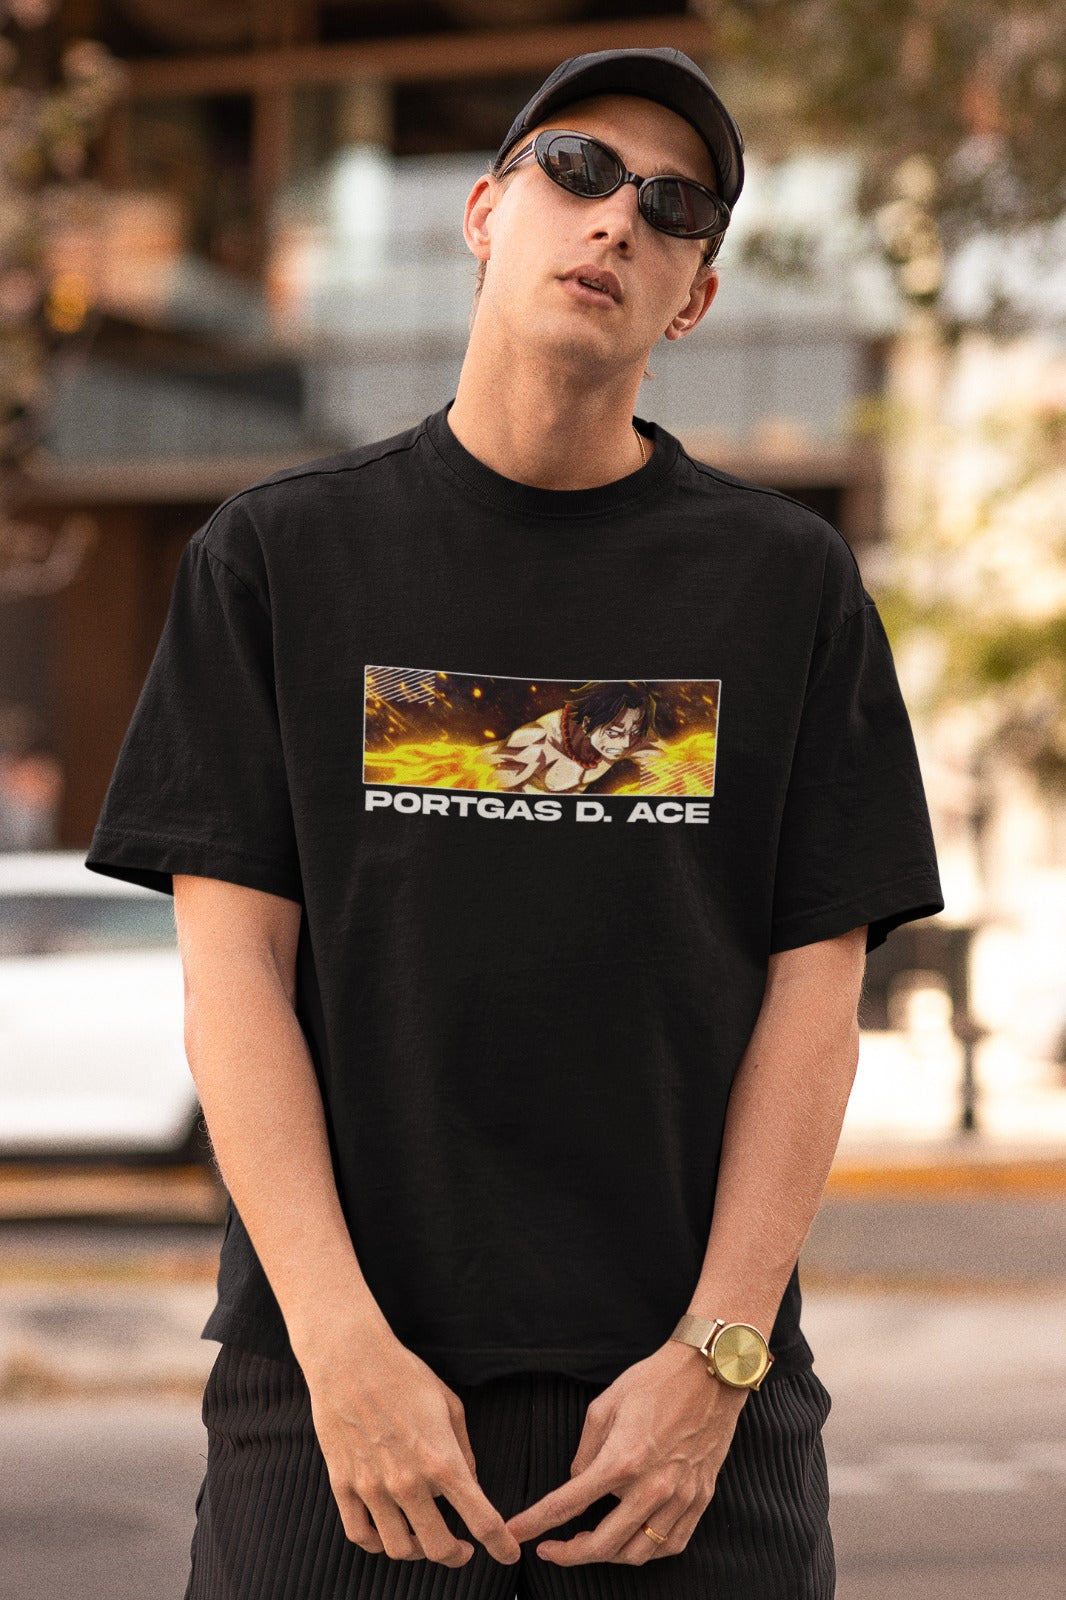 Ignite your style with our black unisex oversized t-shirt featuring Portgas D. Ace enveloped in blazing fire. This captivating tee showcases Ace's fiery spirit, complemented by his name in English for an authentic touch. Crafted with premium quality, it offers comfort and style. Perfect for One Piece fans, anime conventions, or casual wear. Make a bold statement and add this unique t-shirt to your collection today!